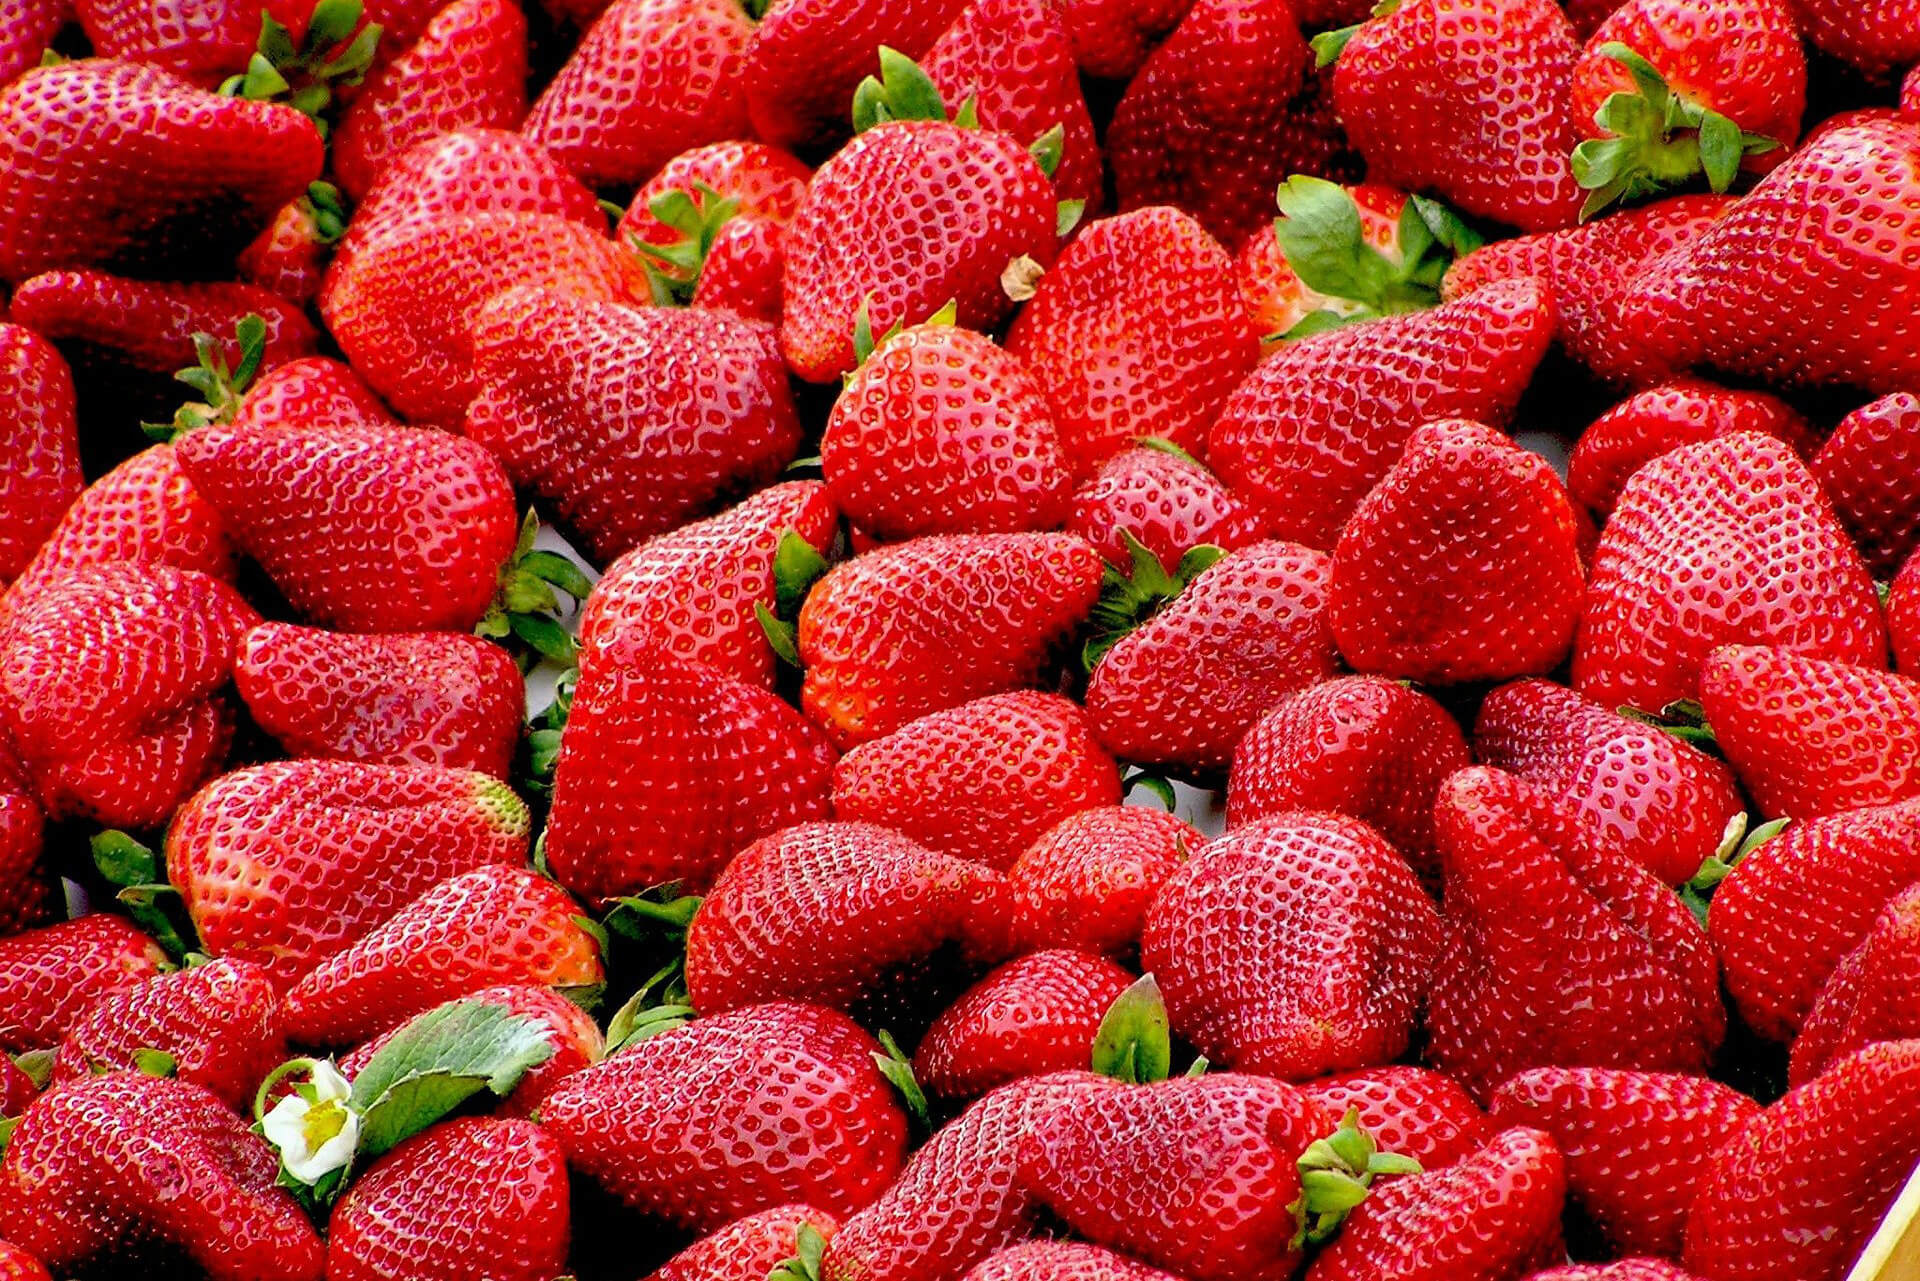 Photograph of freshly picked strawberries